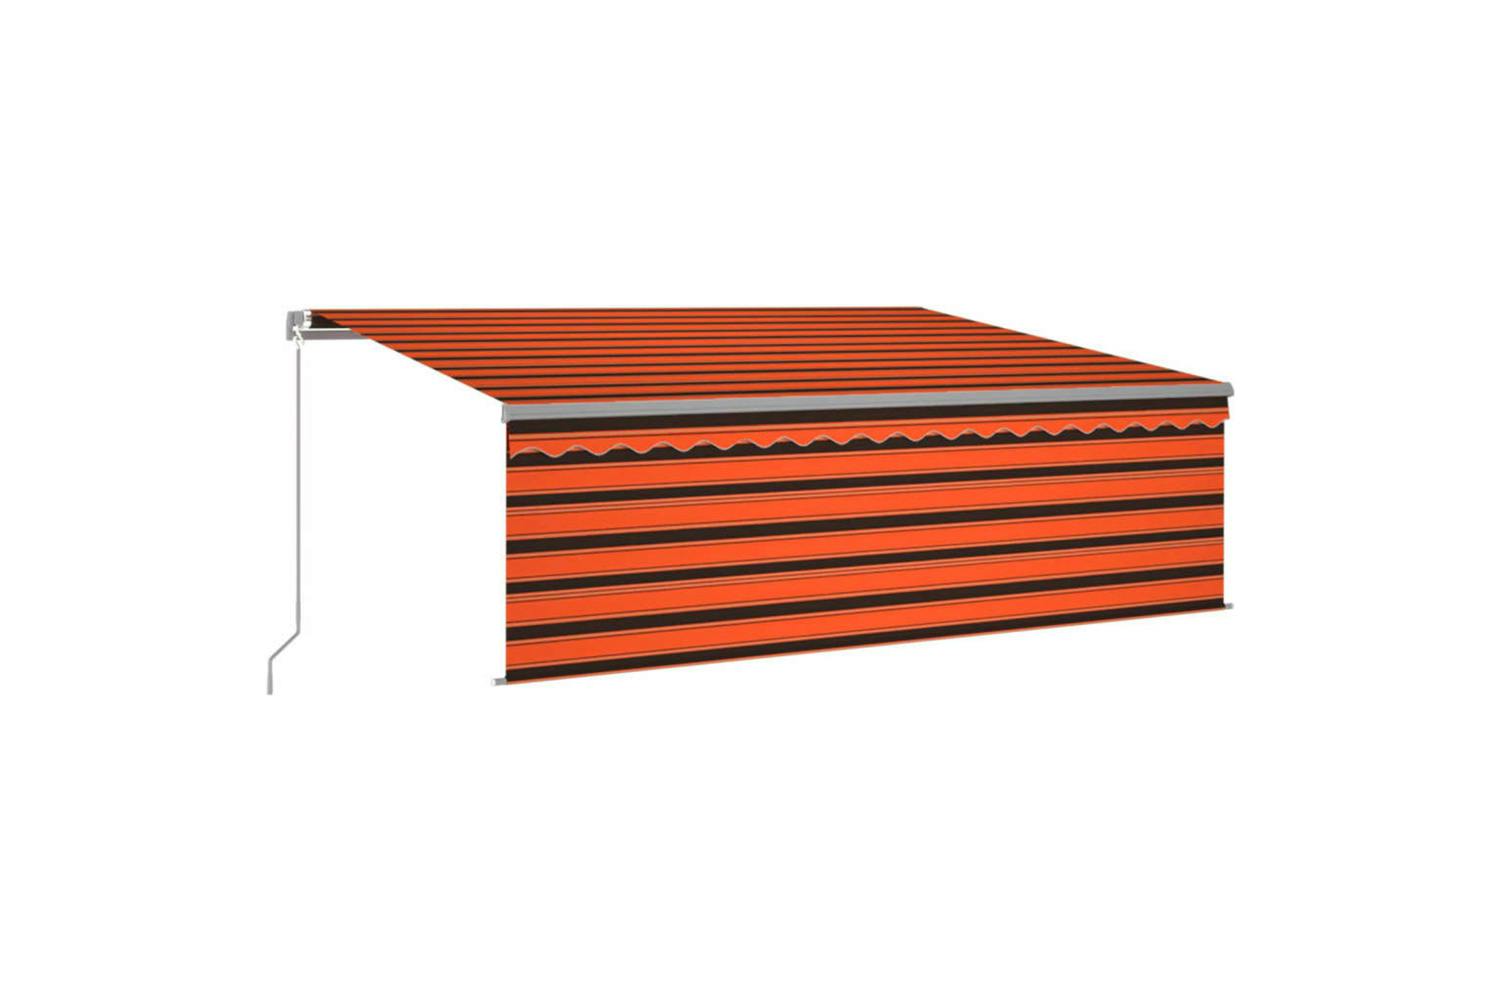 Vidaxl 3069425 Manual Retractable Awning With Blind&led 4x3m Orange&brown